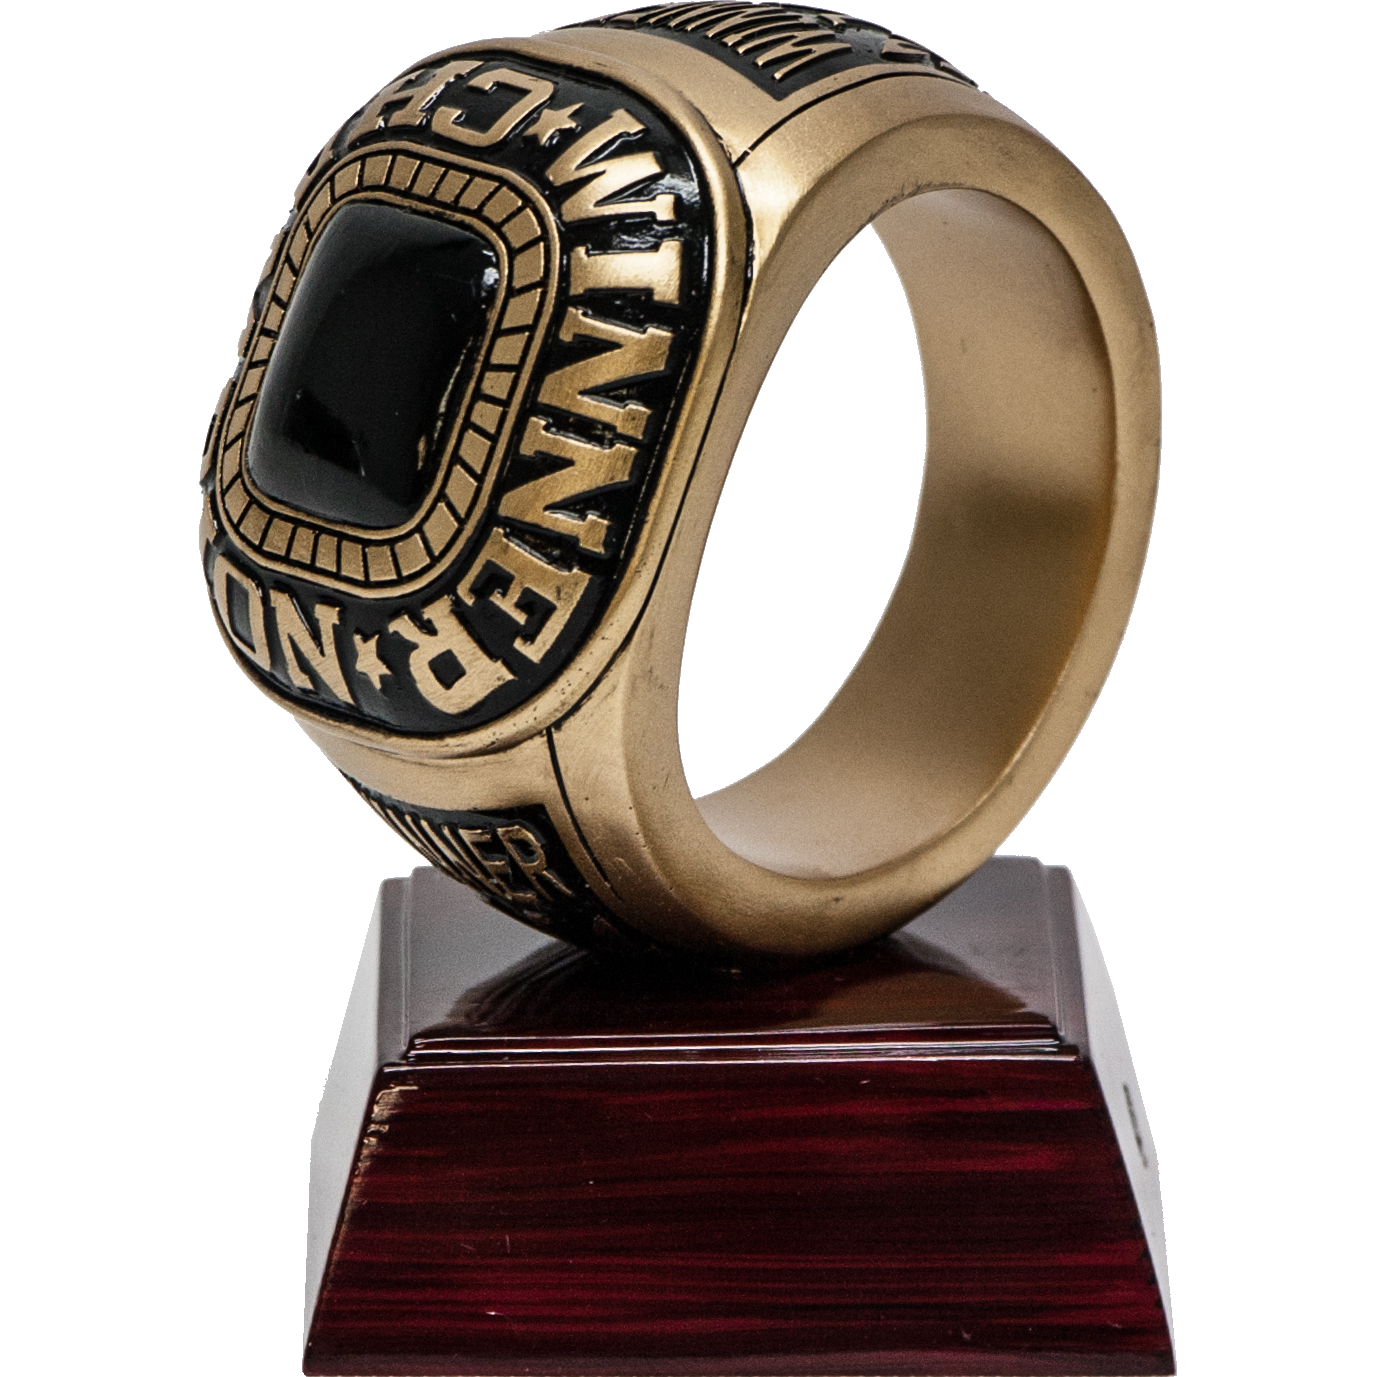 Resin Champion Ring Award - - Nothers